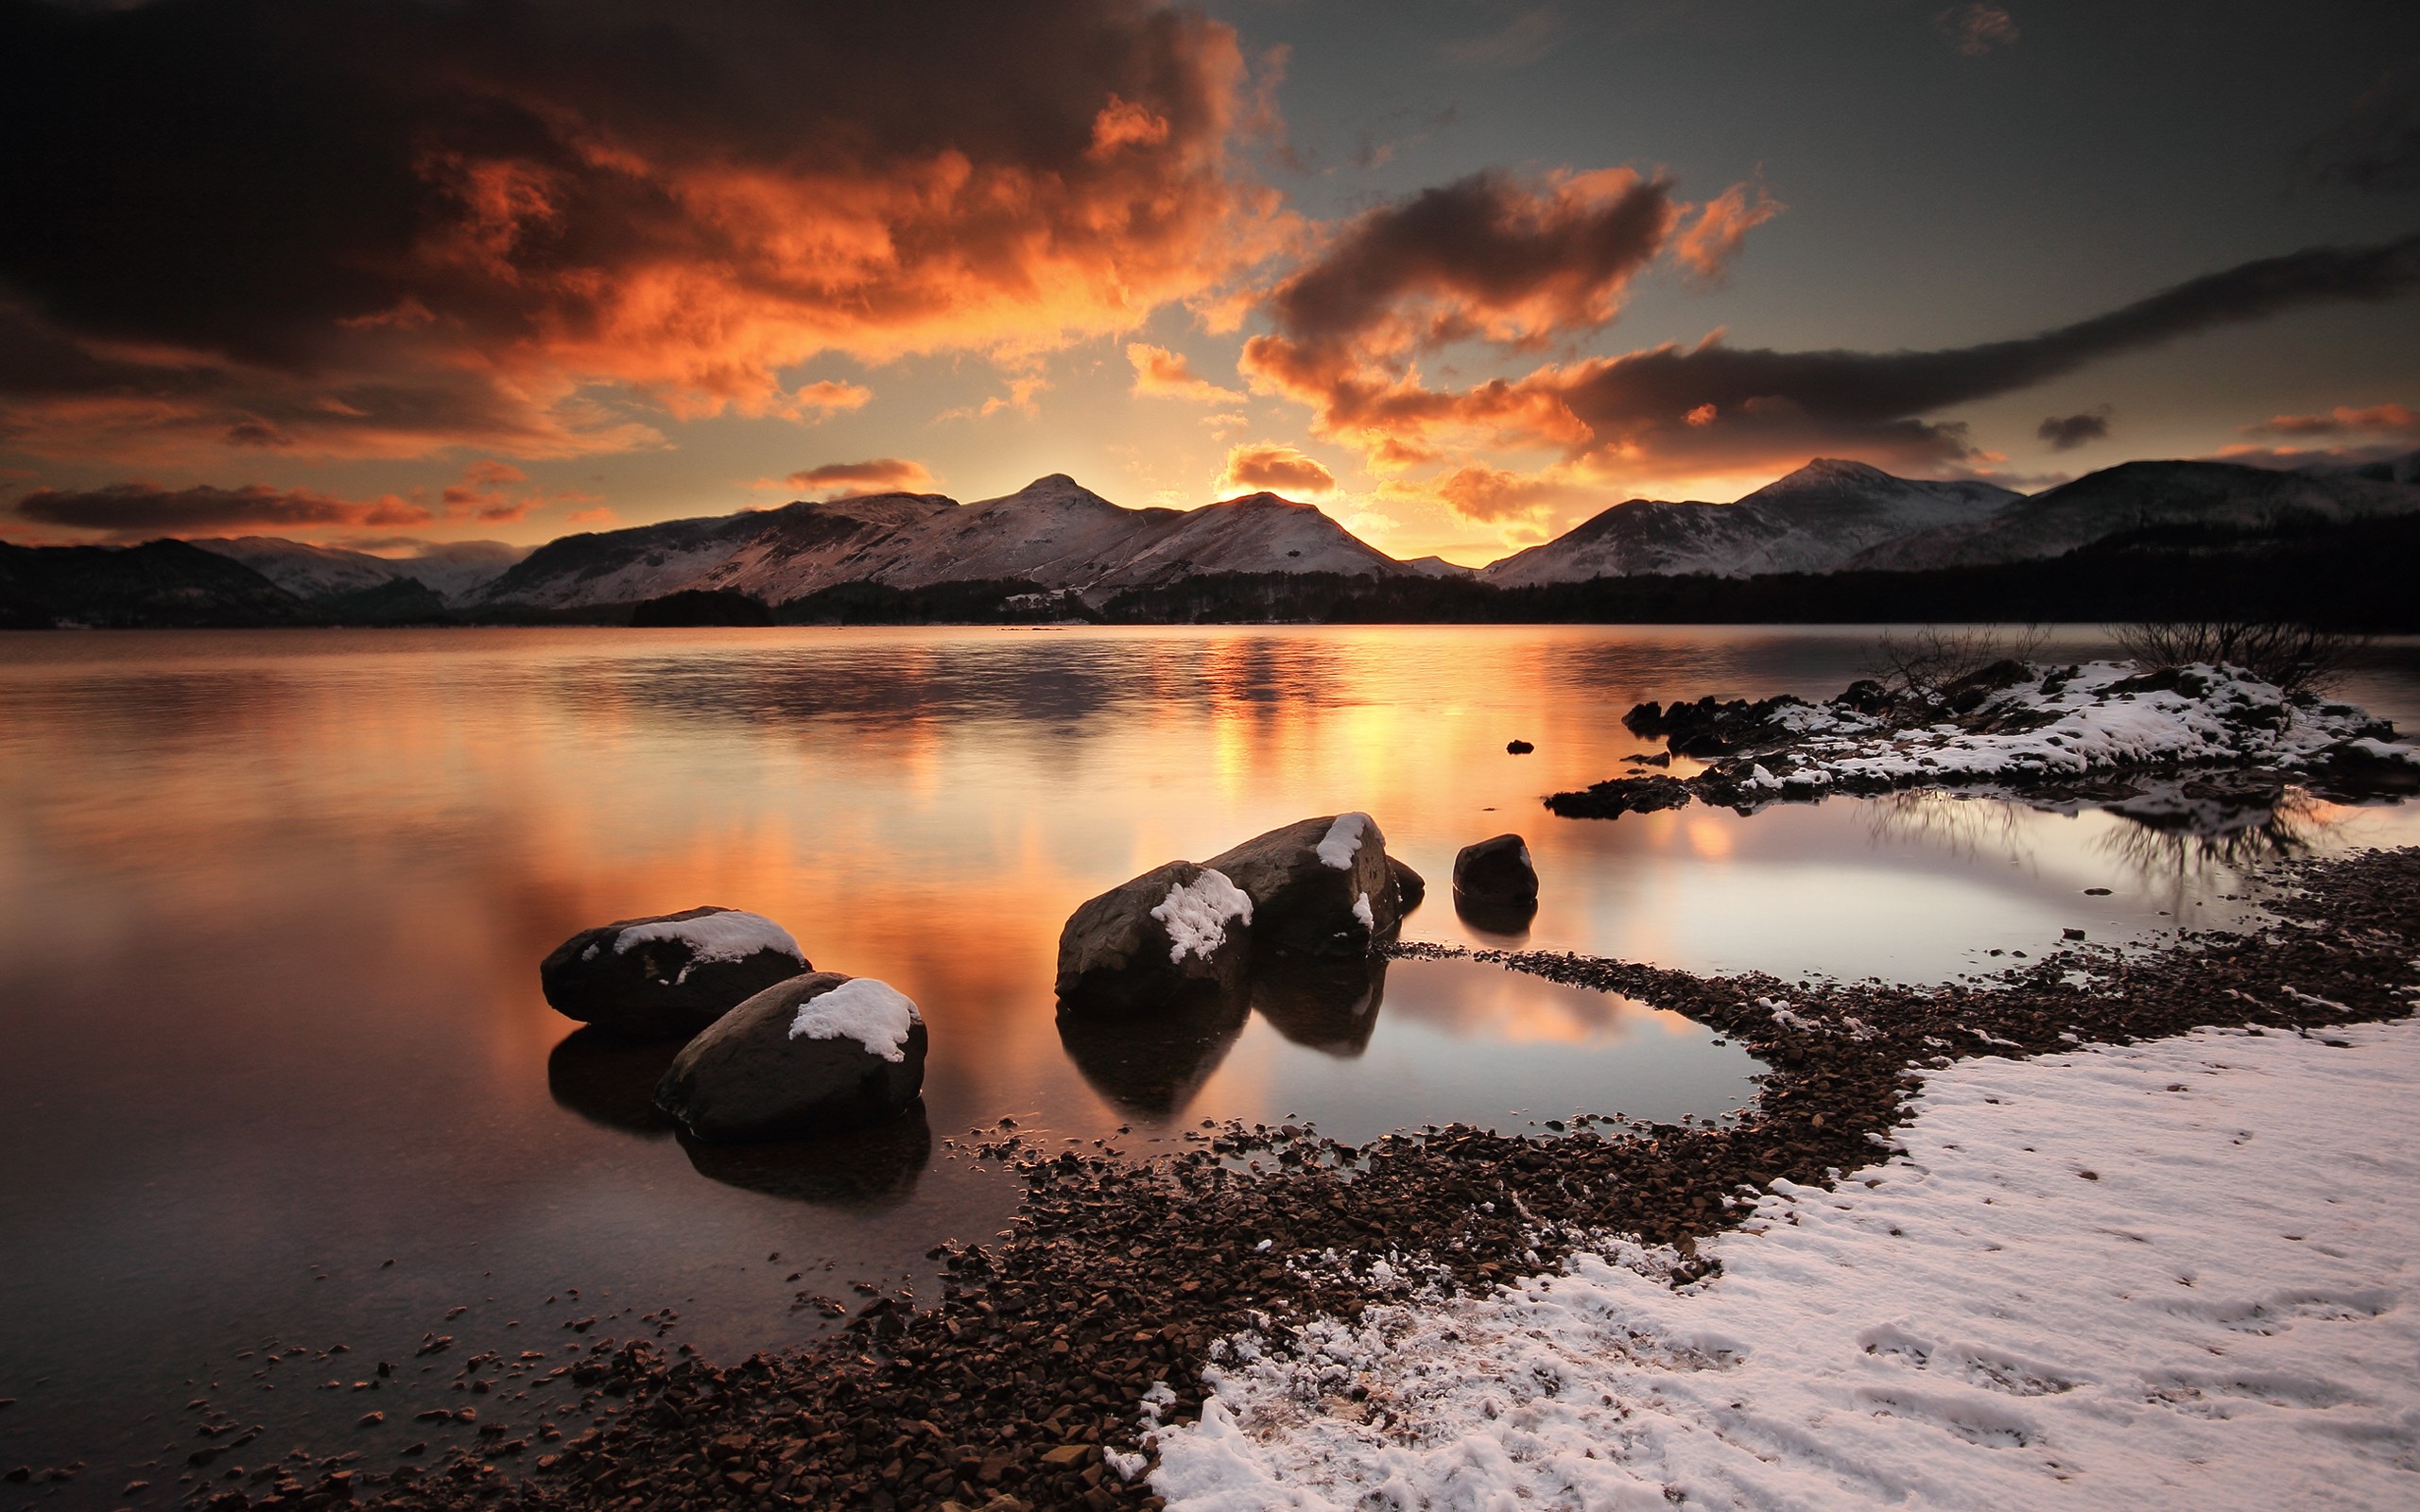 General 2560x1600 landscape lake sunset stones mountains snow coast sky clouds water winter nature sunlight